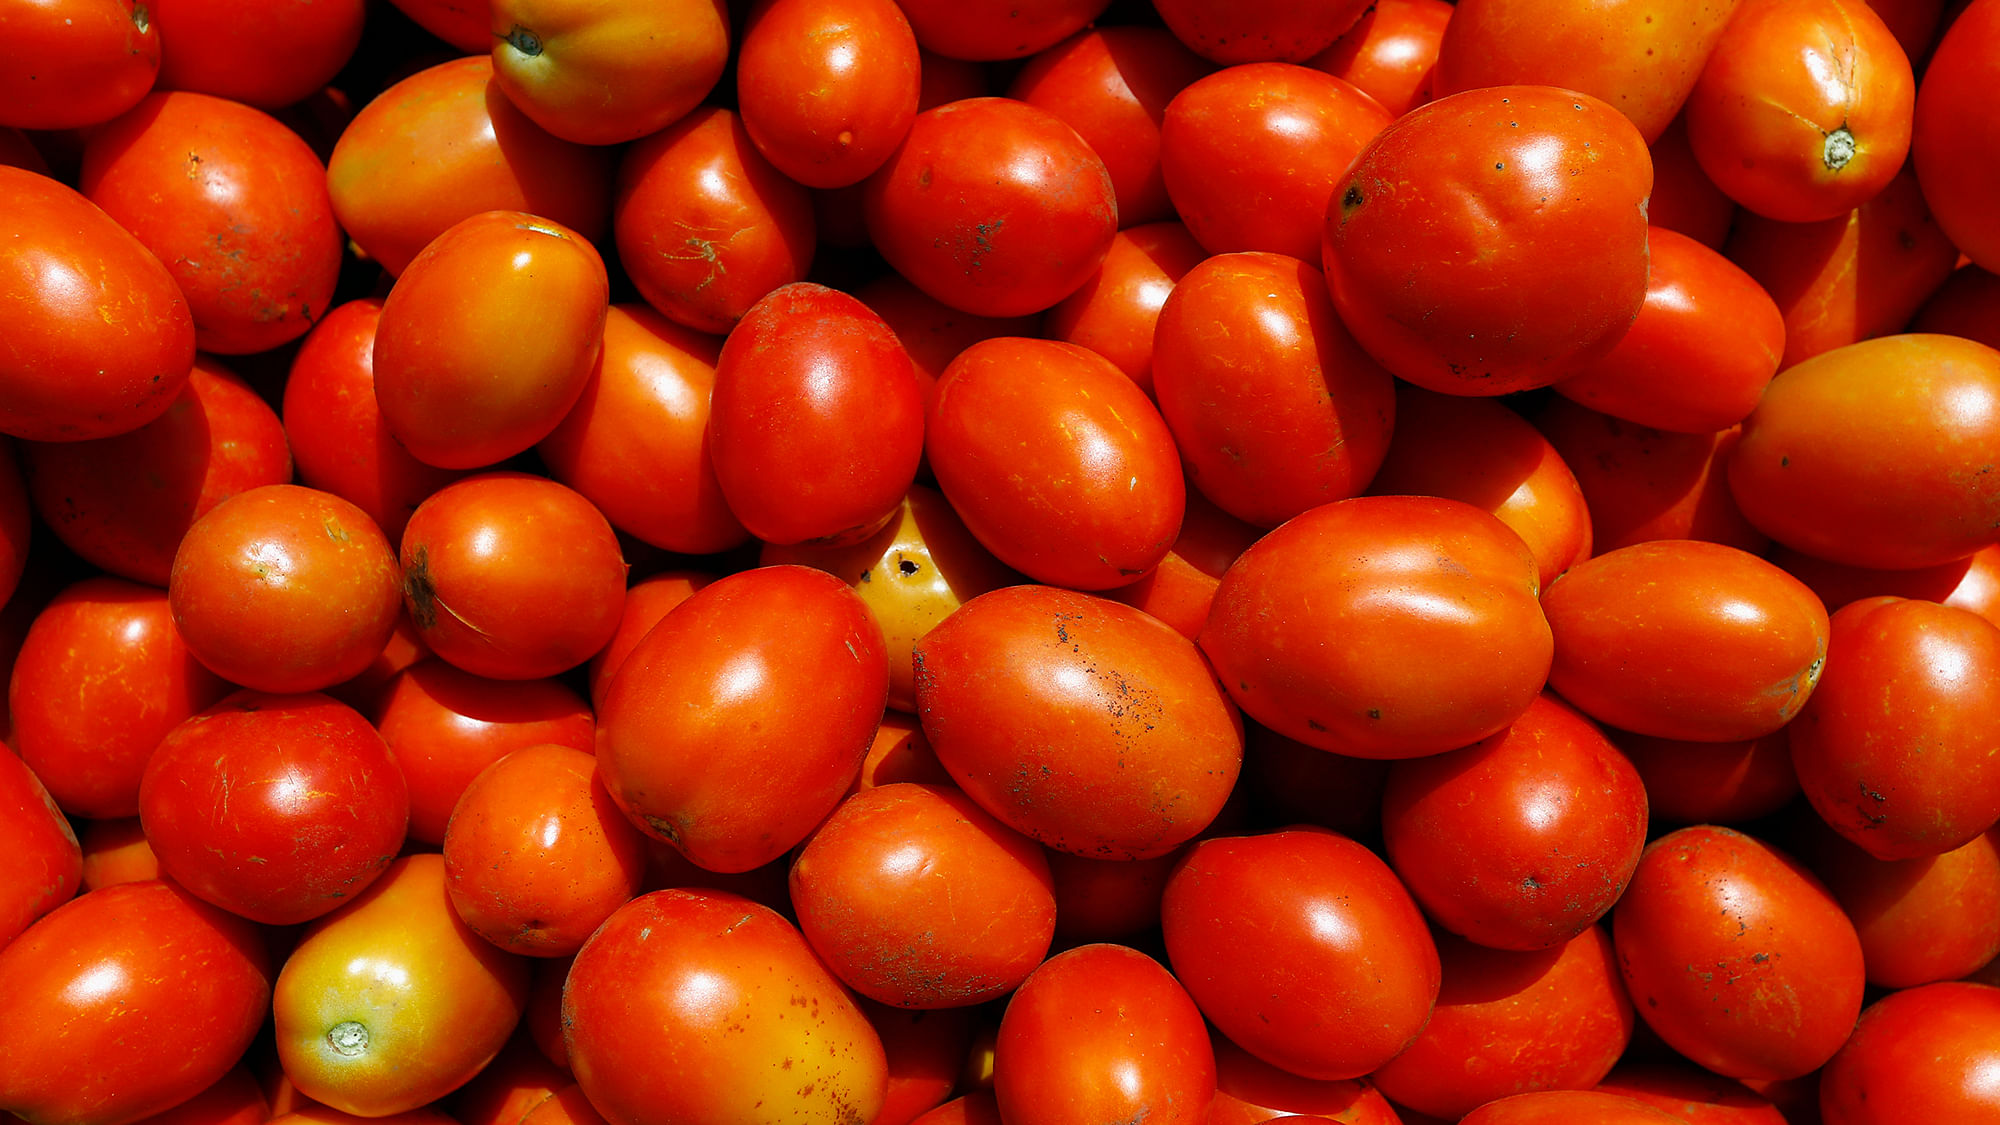 Buying tomatoes will now be a costly affair. (Photo: Reuters)